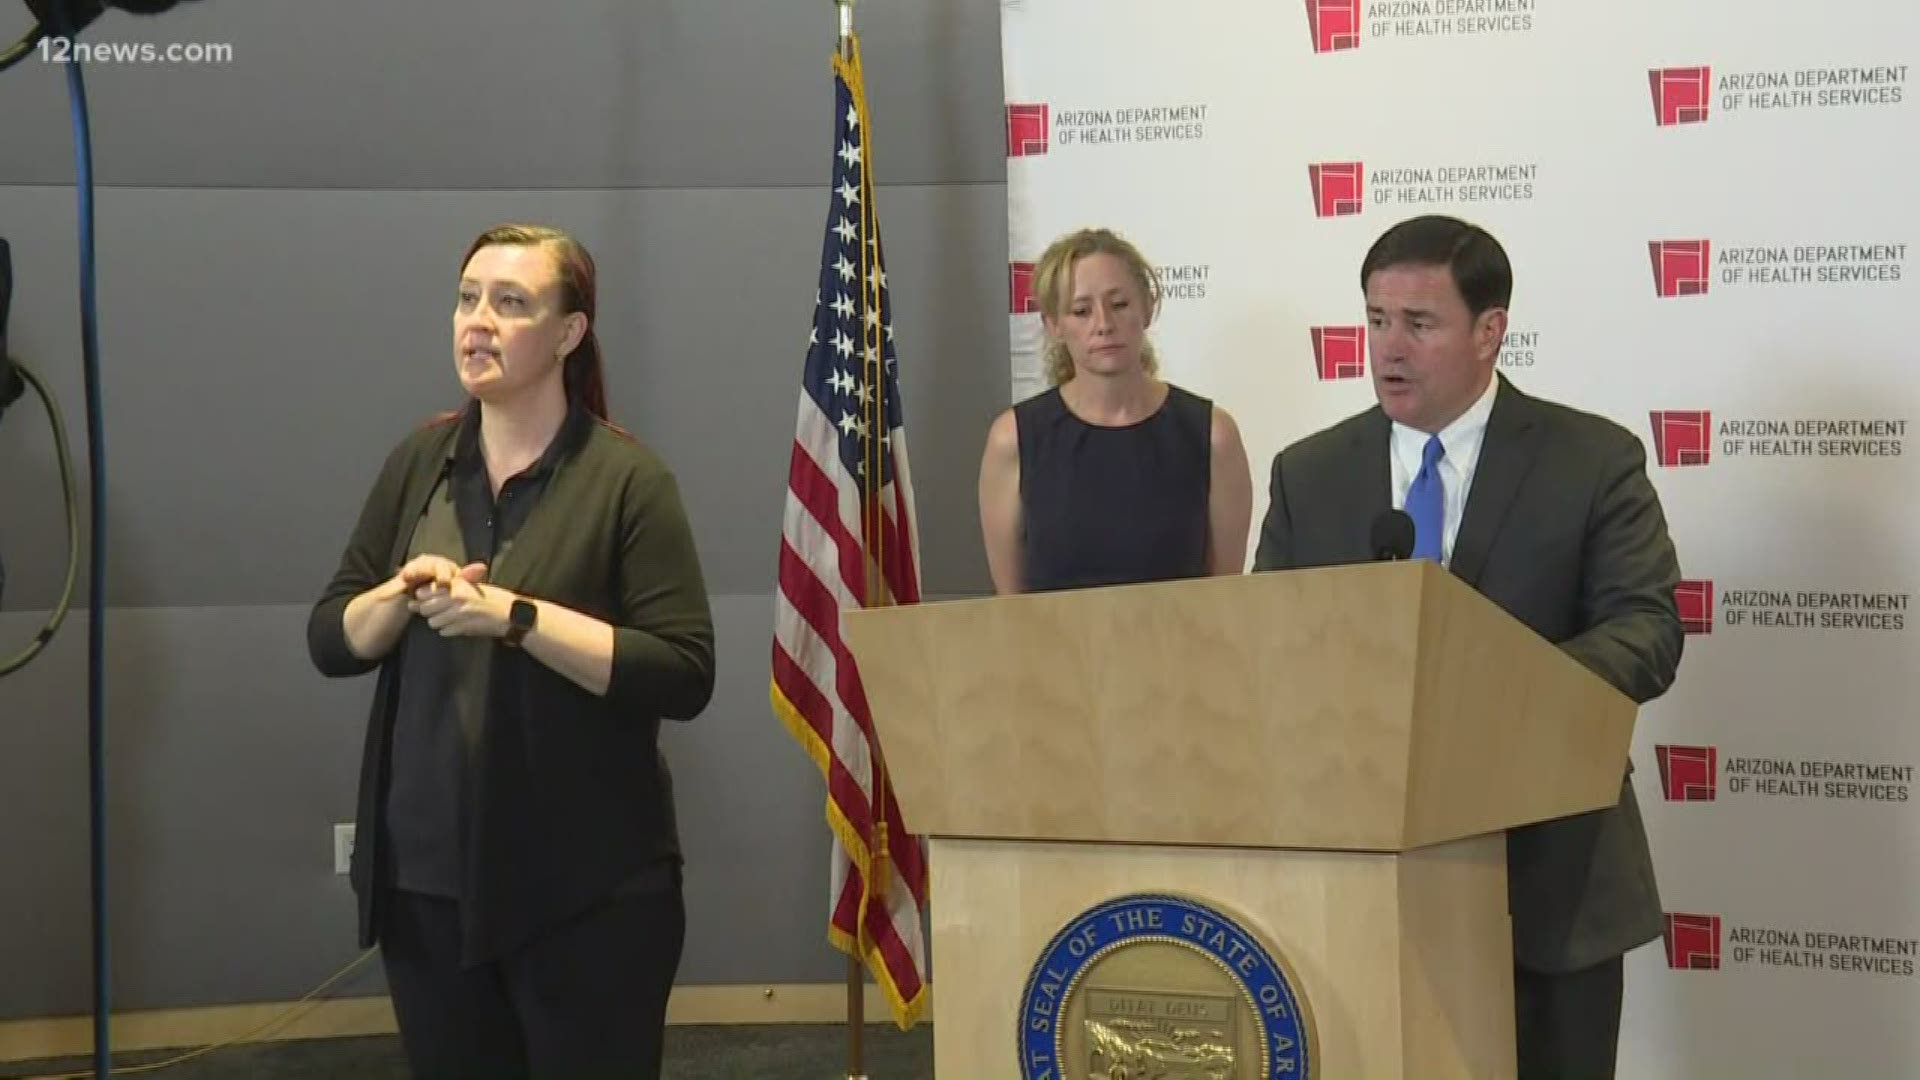 Gov. Ducey says the coronavirus crisis isn't far enough along in Arizona to order people to stay at home. Ducey did issue an executive order listing essential jobs.